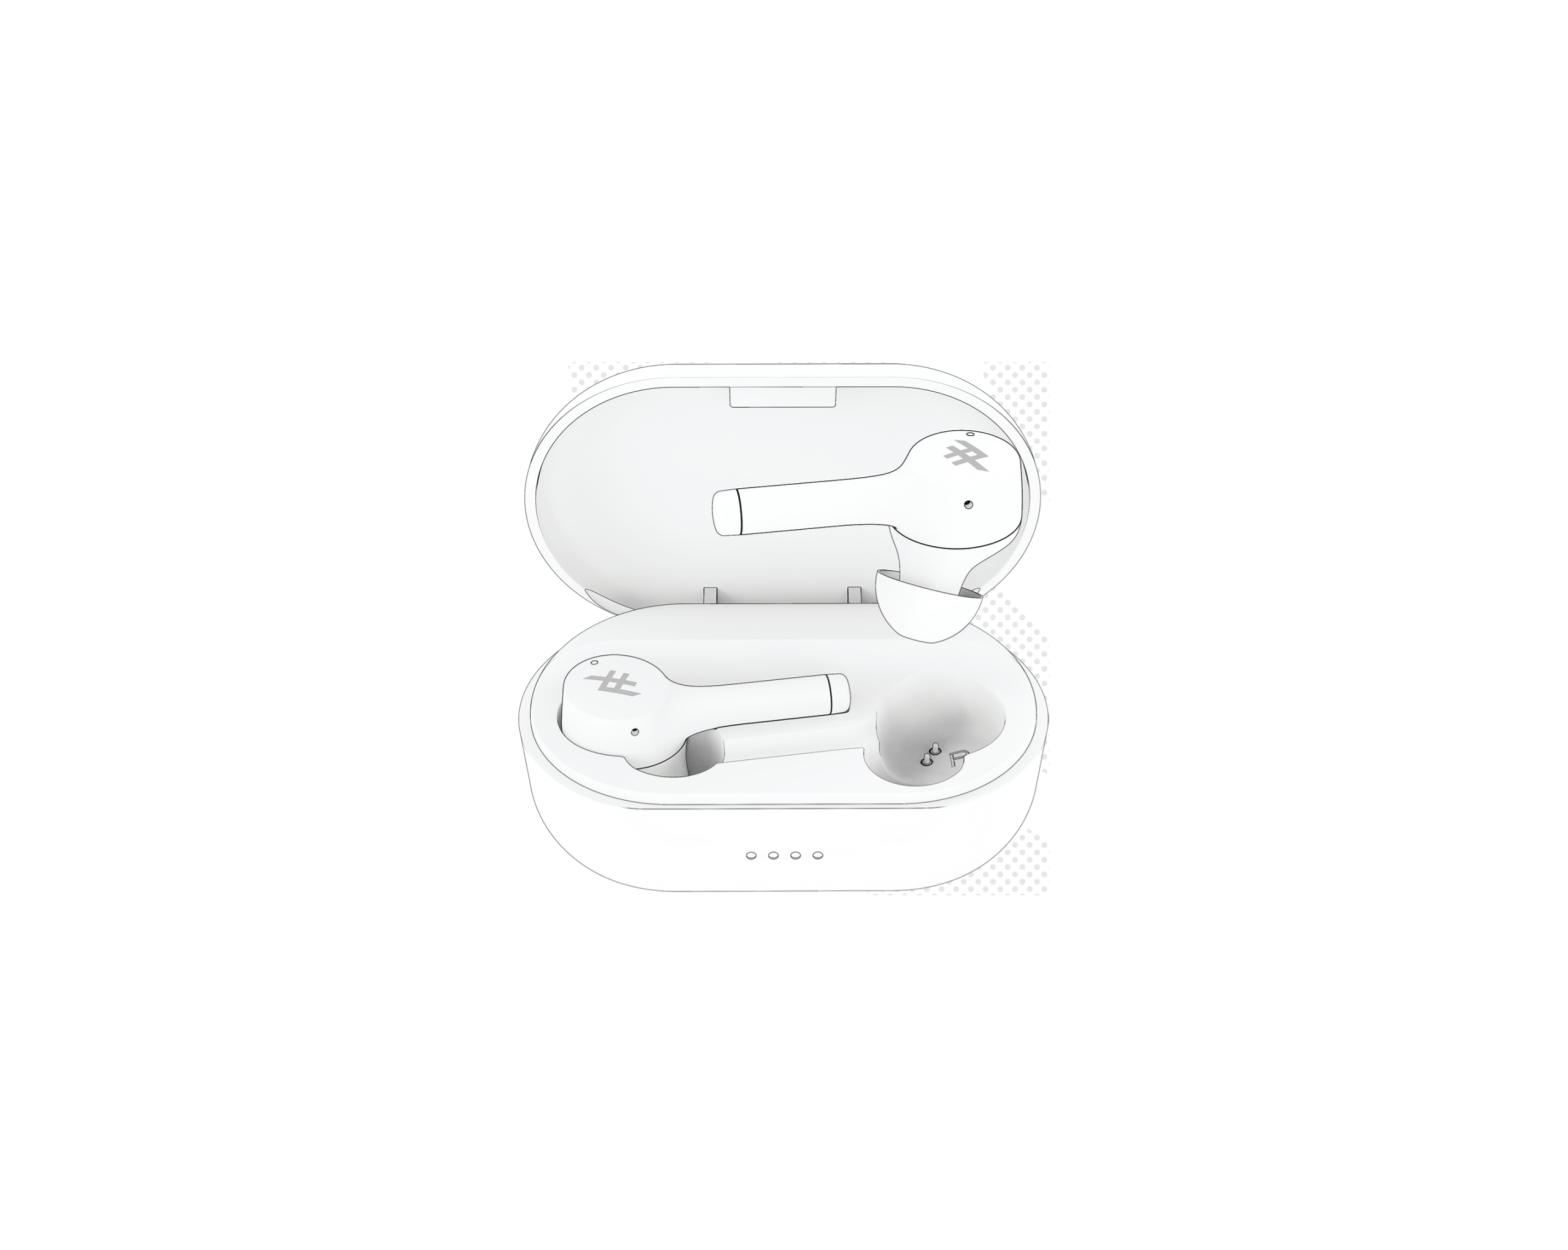 IFROGZ Airtime Pro 2 Truly Wireless Earbuds User Guide